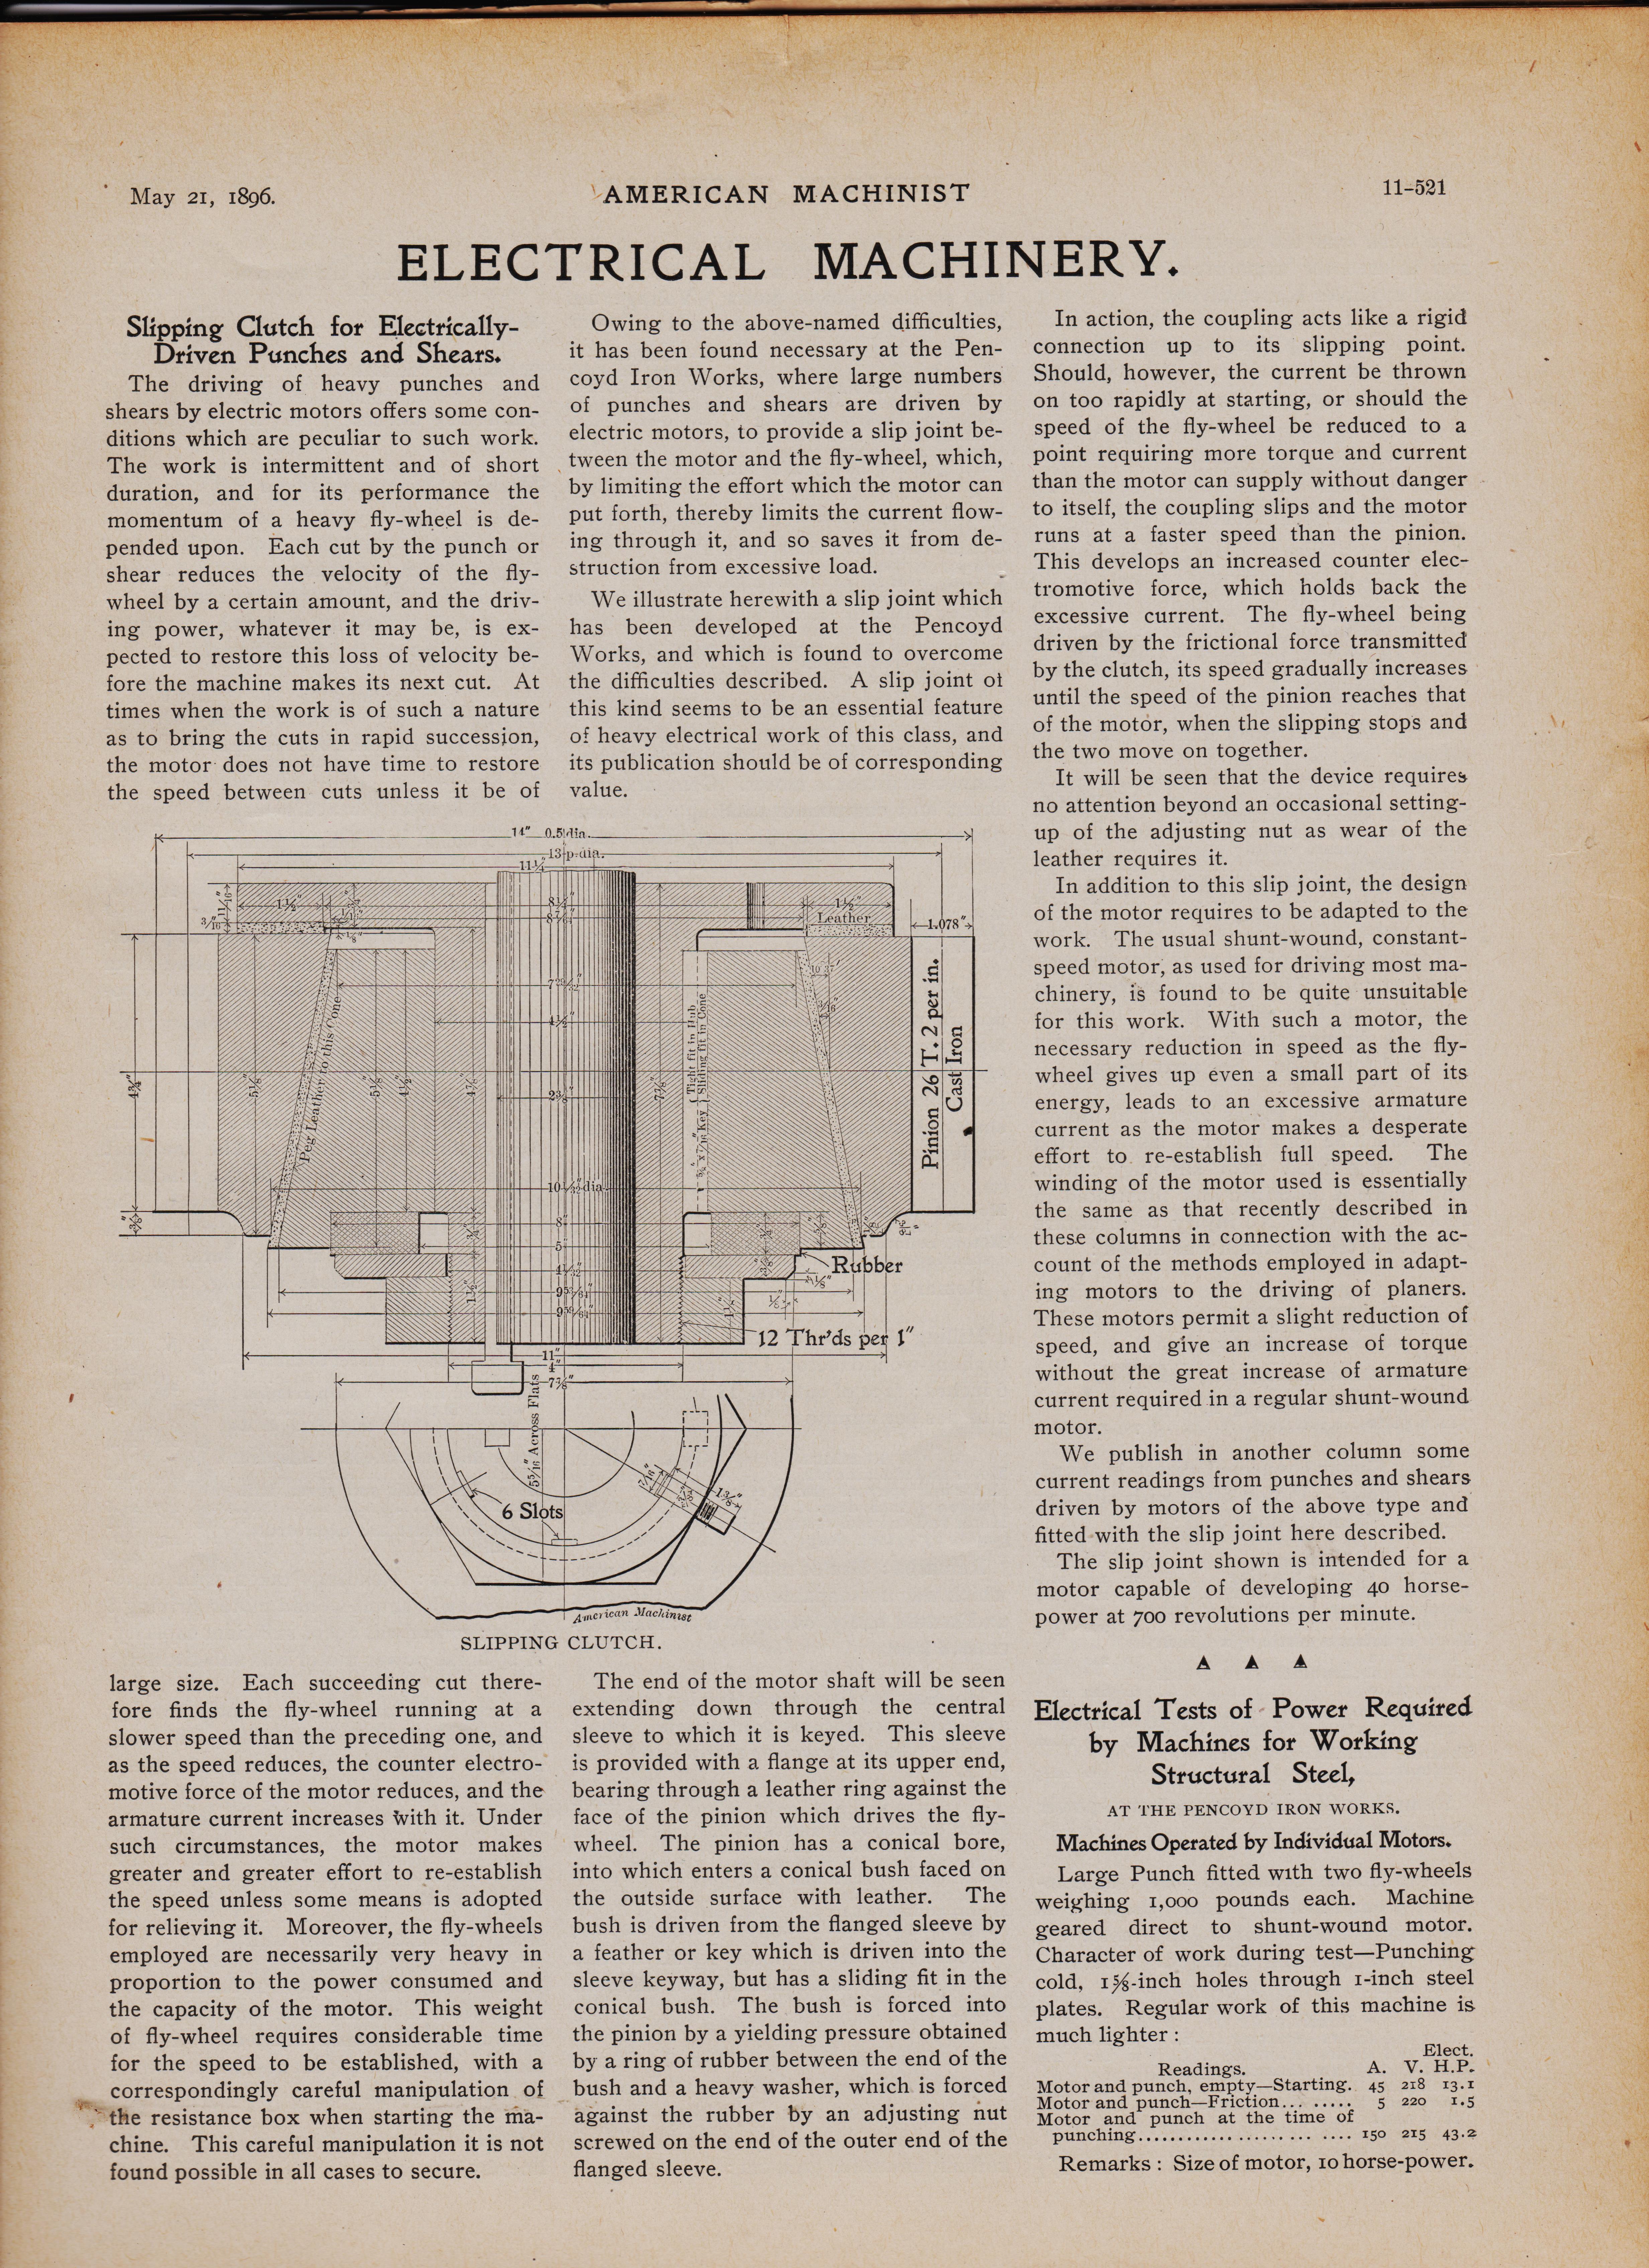 https://antiquemachinery.com/images-1896/American-Machinist-Feb-12-1887-May-1-pg-11-Electrial-tests-of-power-Machinery-indivual-Motors.jpeg